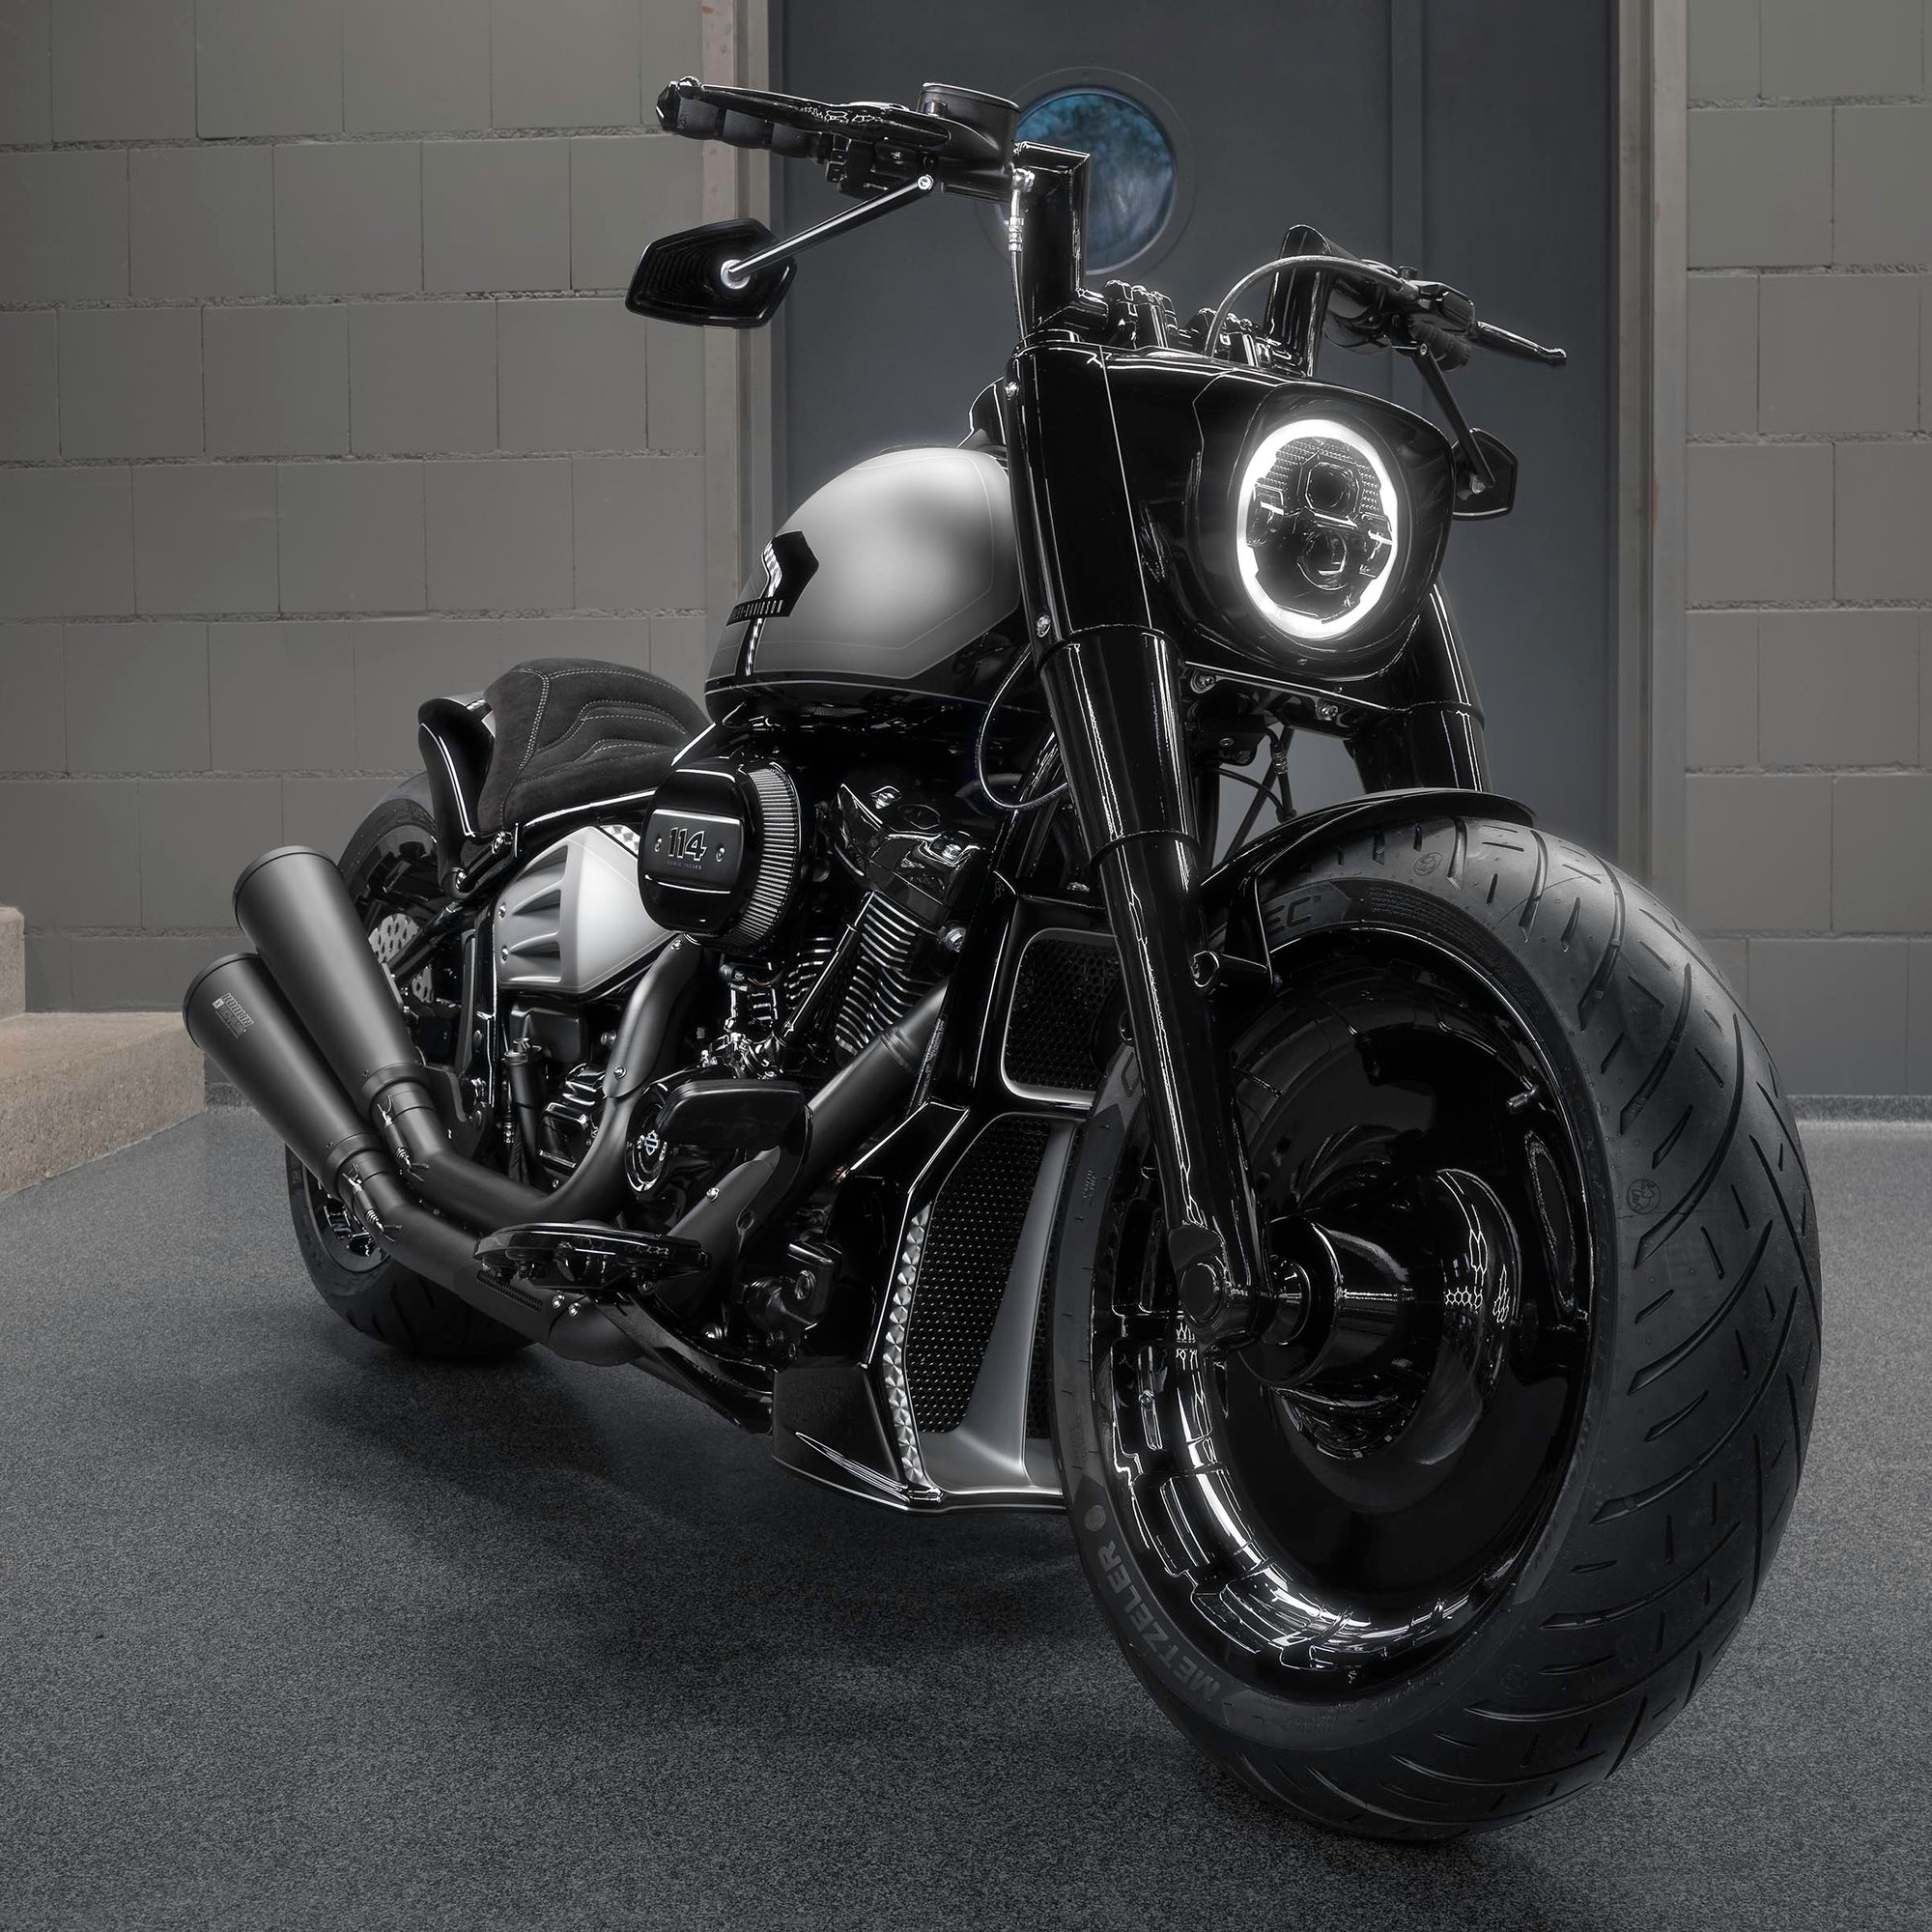 Harley Davidson motorcycle with Killer Custom parts from the front in a modern bike shop